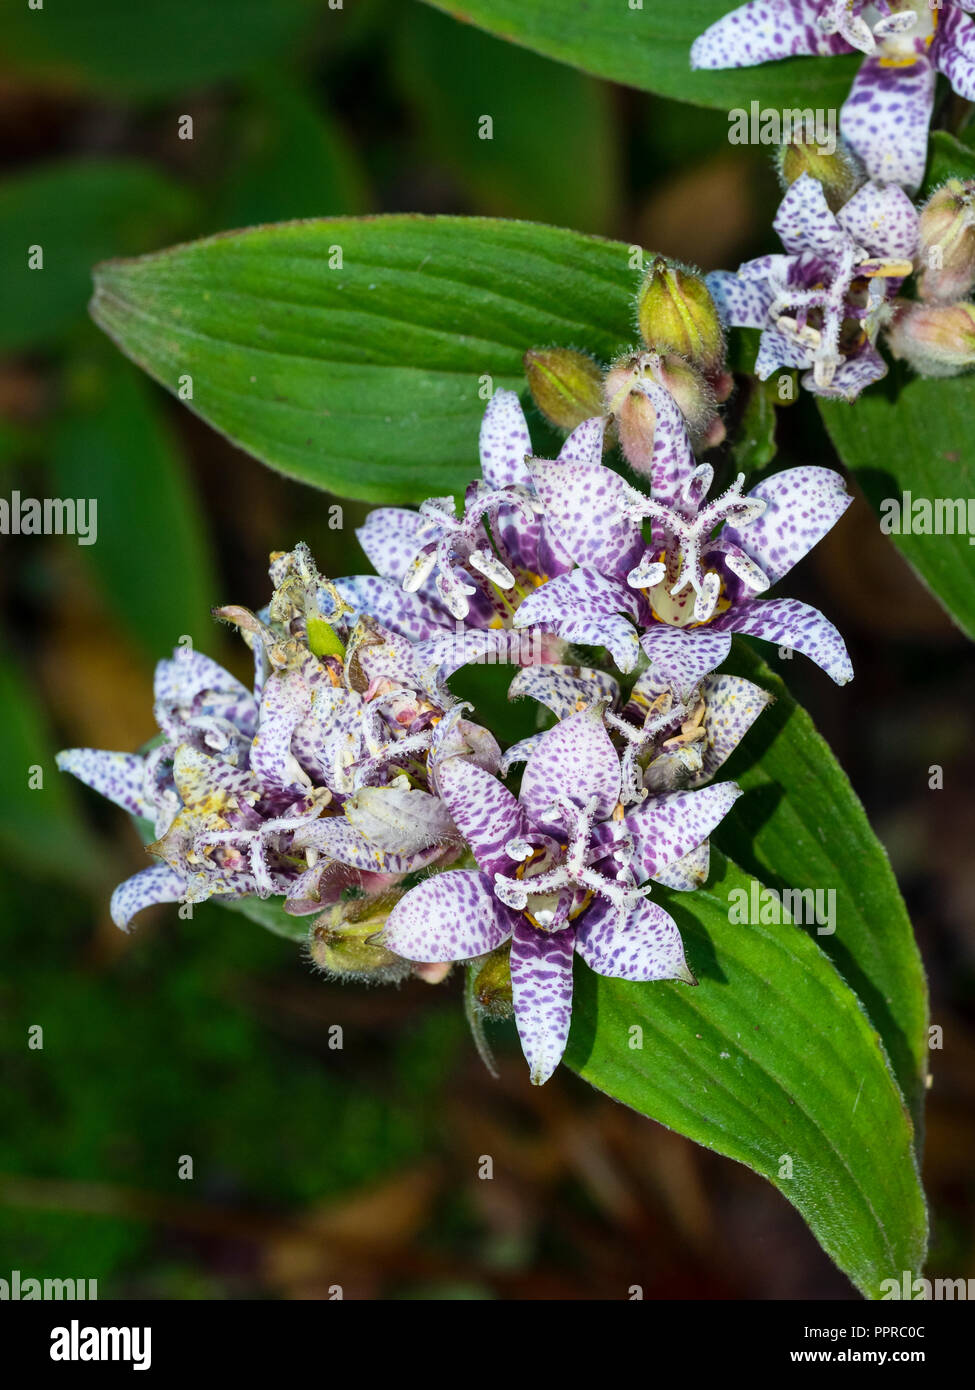 Clusters of purple spotted white flowers of the hardy perennial Japanese toad lily, Tricyrtis hirta Stock Photo